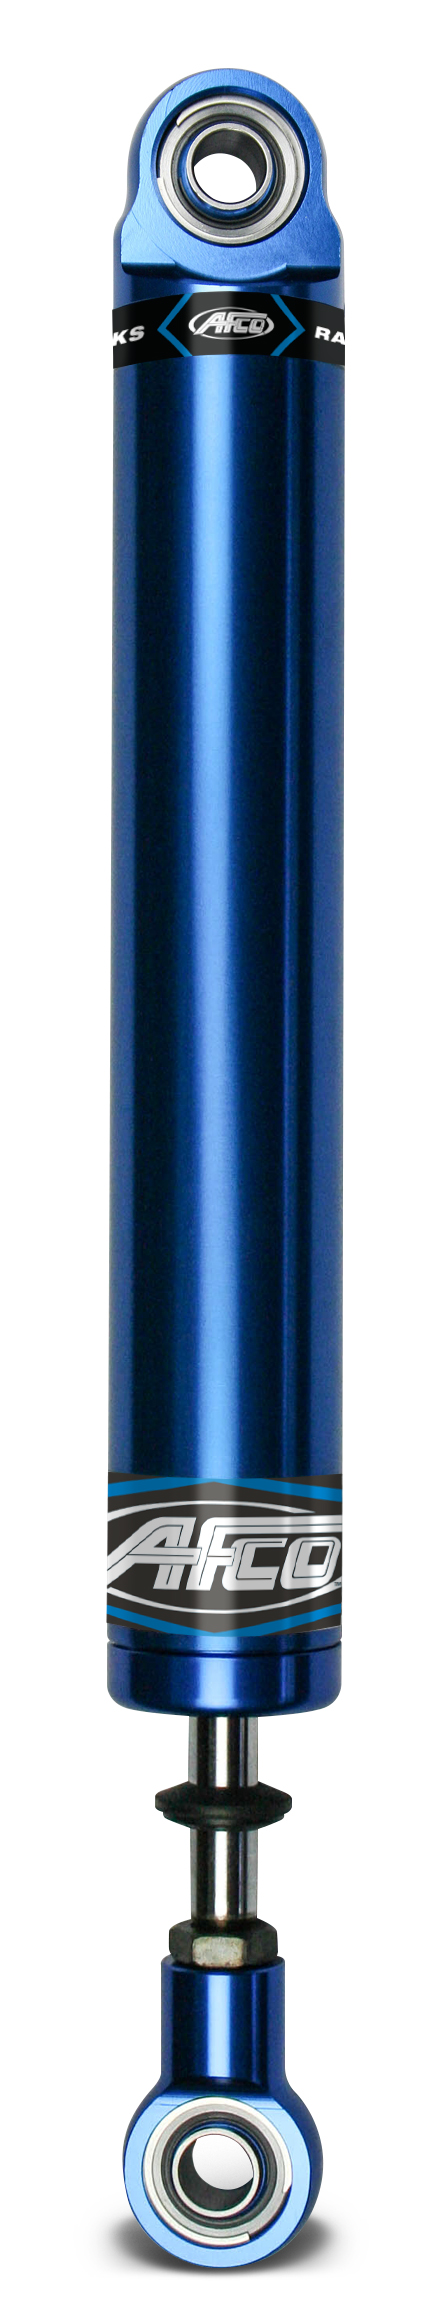 Aluminum Shock Twin Tube 16 Series Small Body 6 Inch Comp 2/Reb 4-8 Smooth